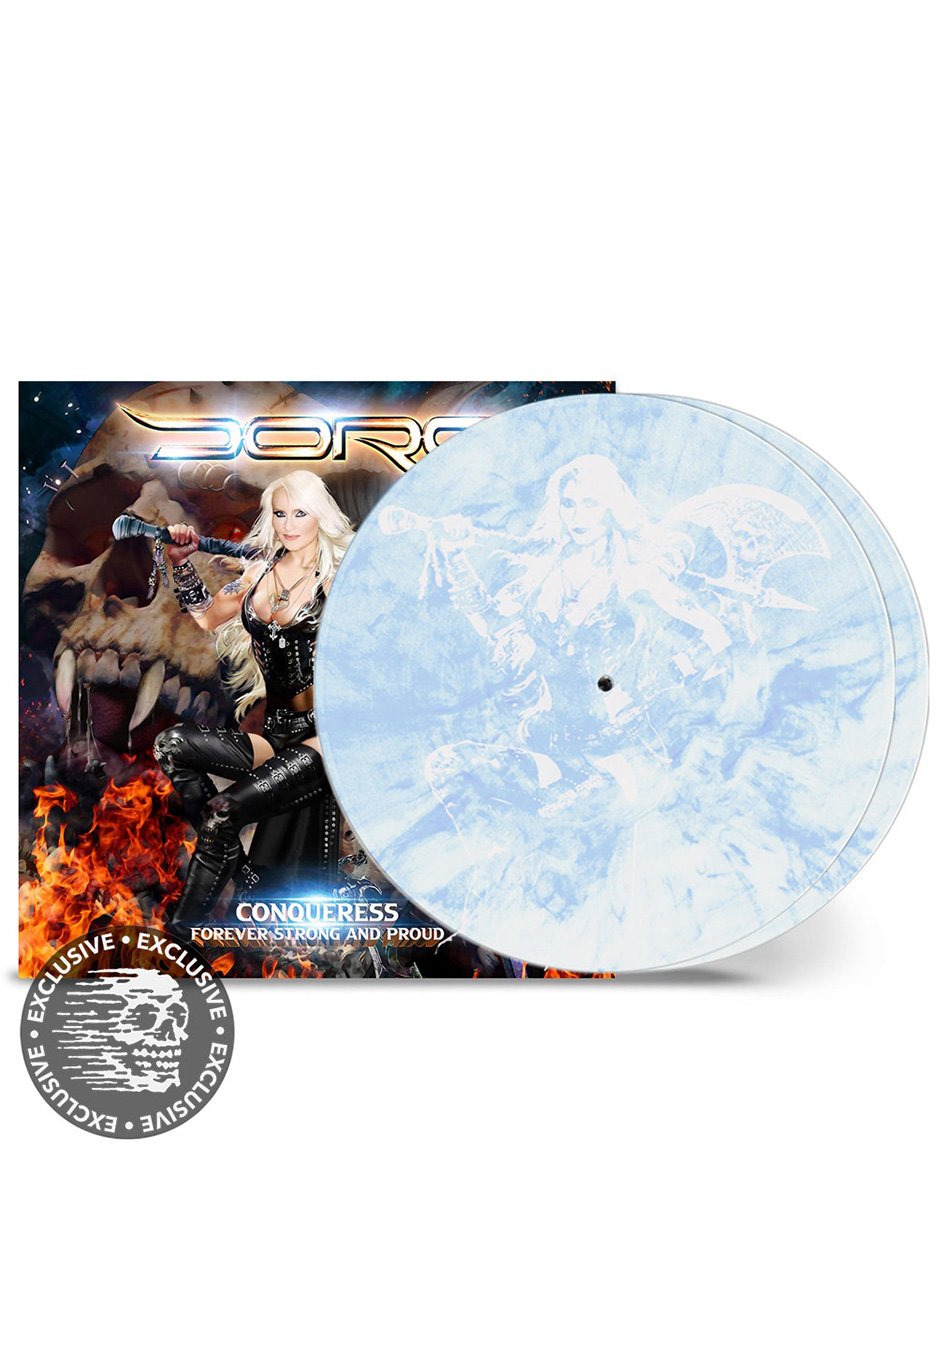 Doro - Conqueress: Forever Strong And Proud Ltd. White/Blue - Marbled 2 Vinyl